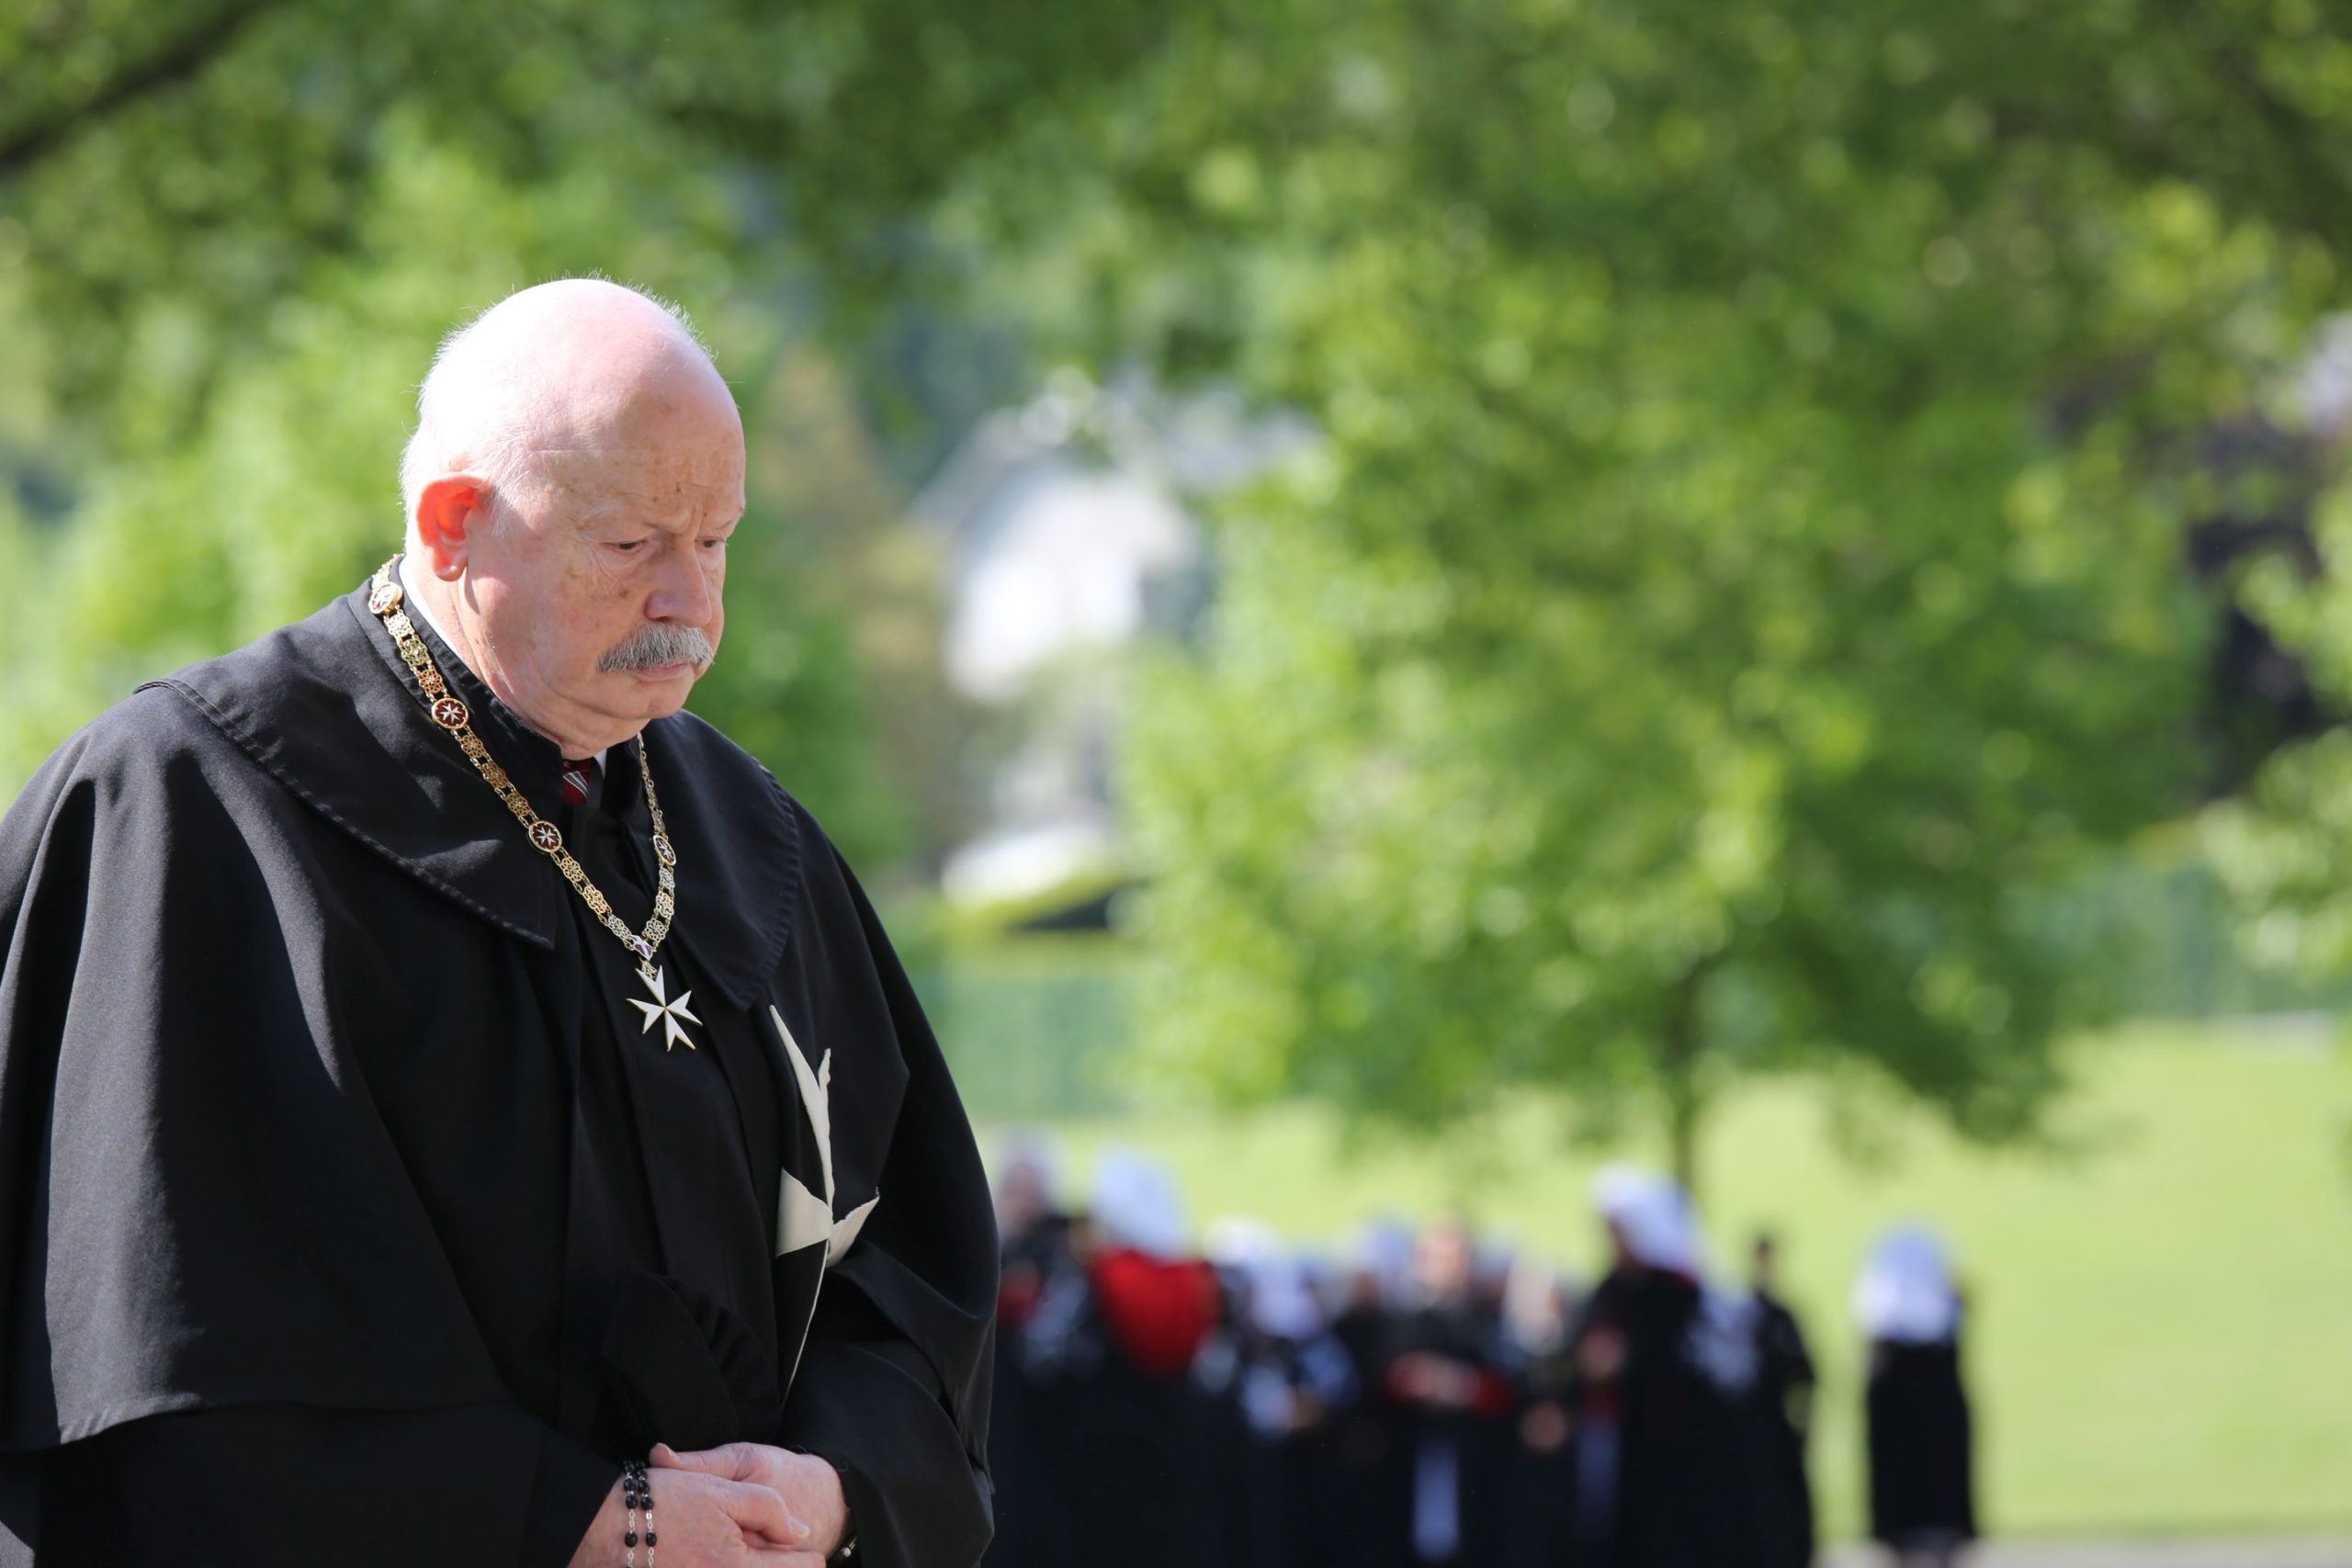 Grand Master Order of Malta: “Malades and their families in my prayers”